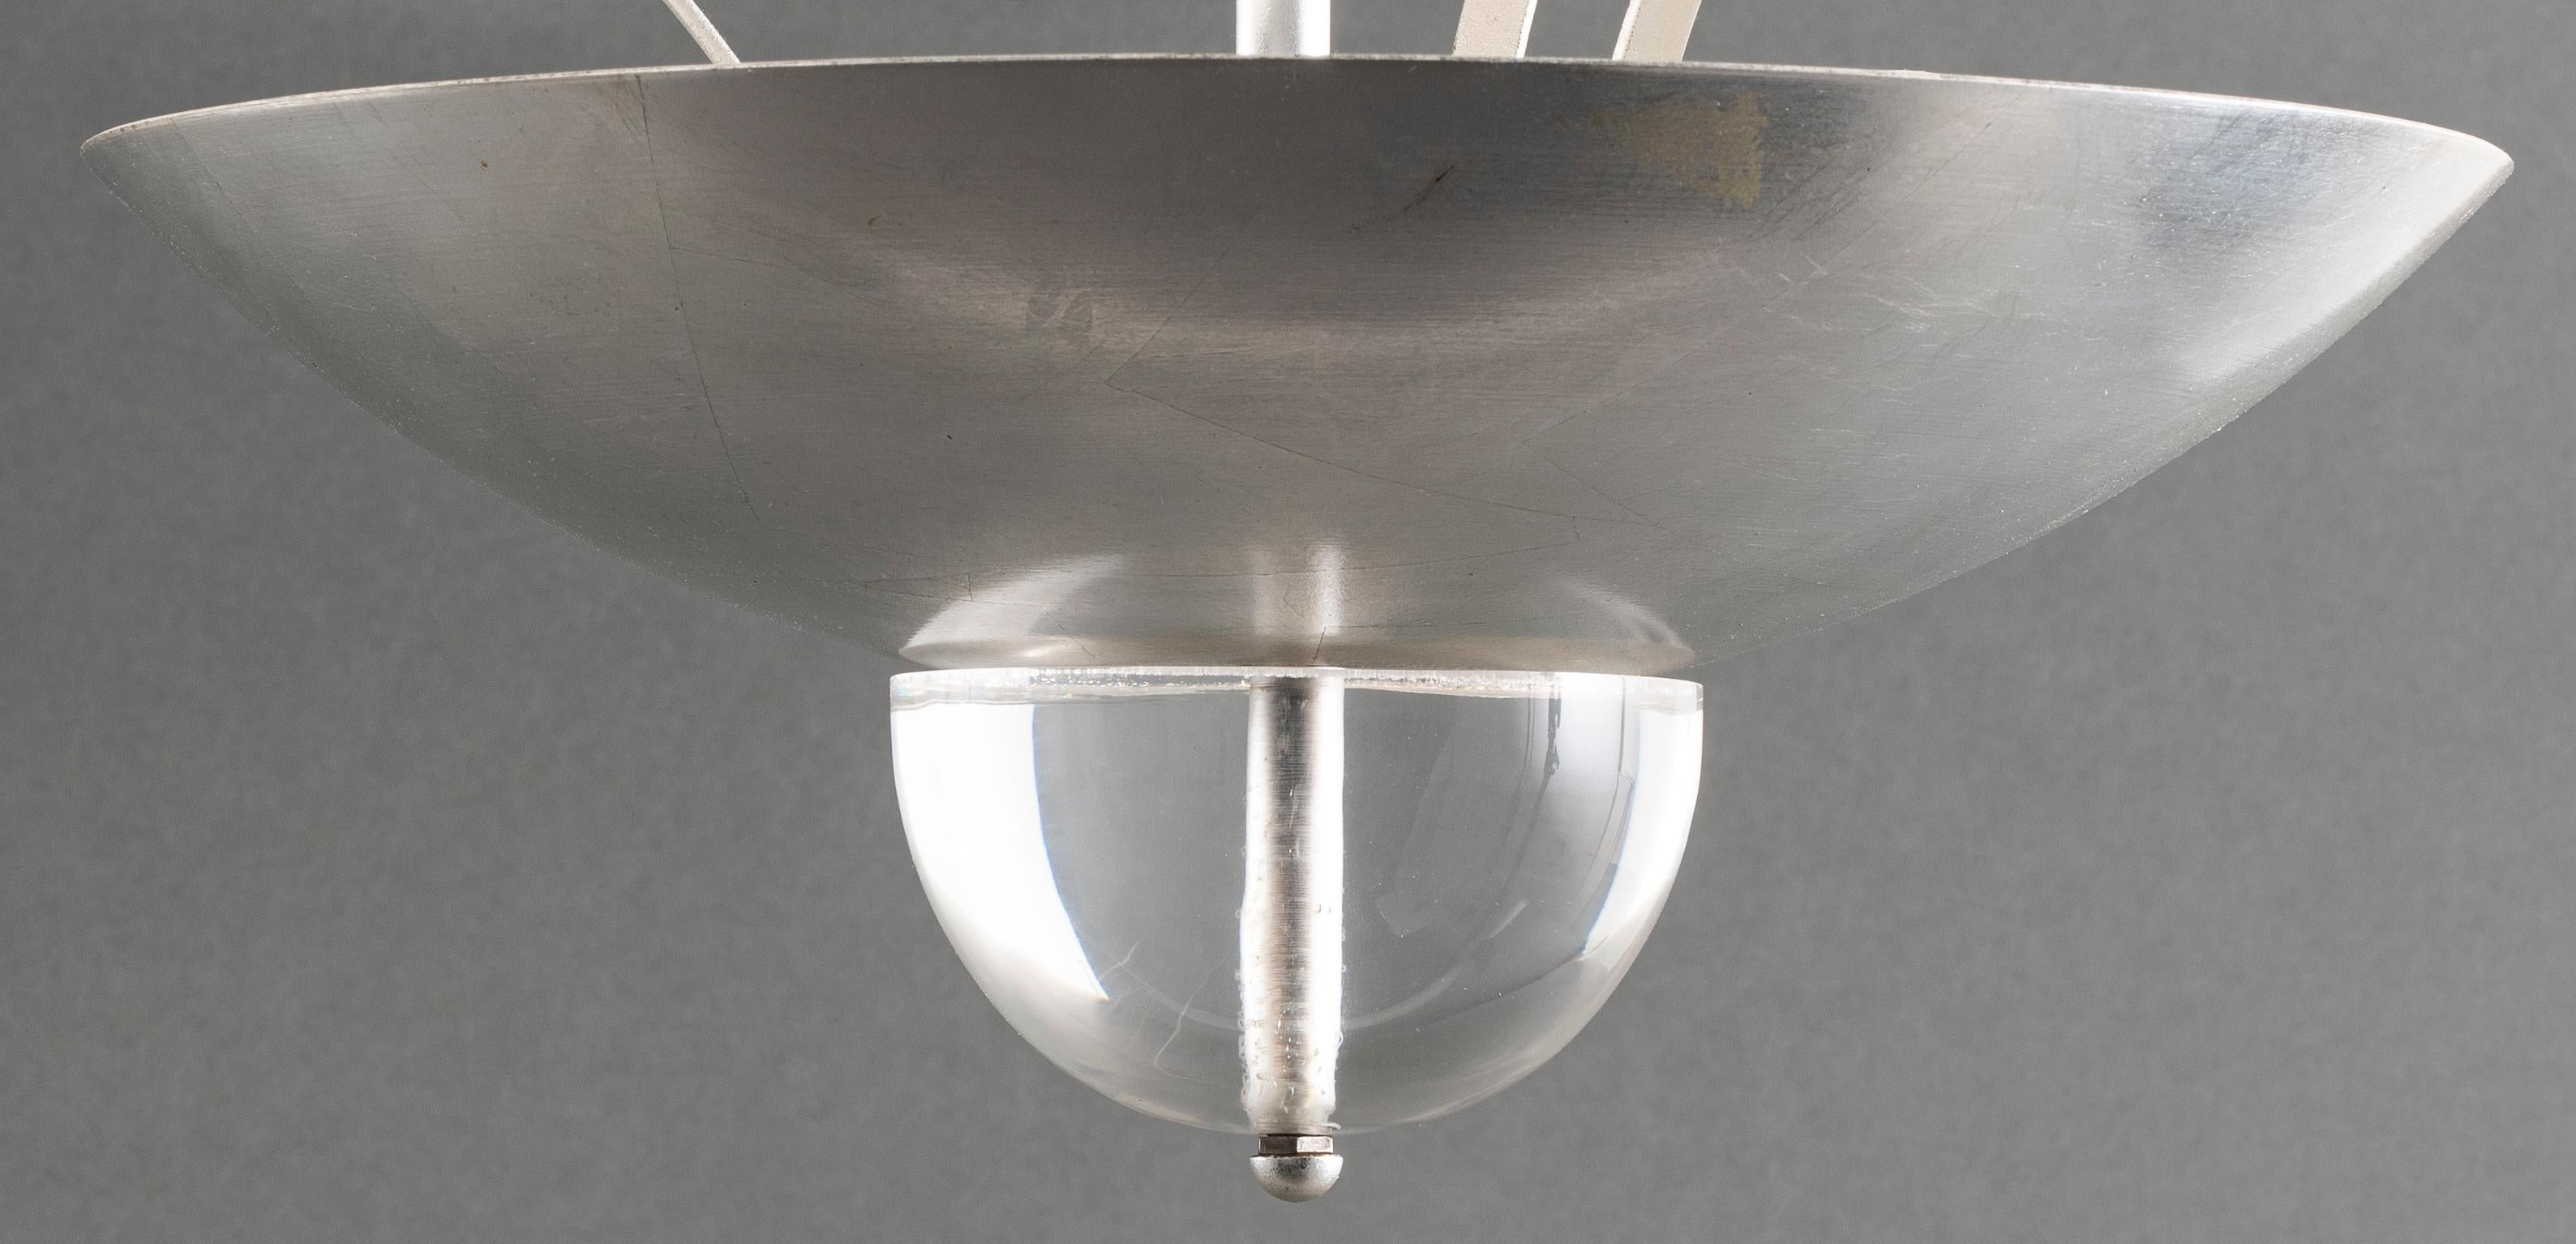 Machine Age style silver-tone five-light tiered chandelier with lucite sphere details. Measures: 34” height x 24” diameter.